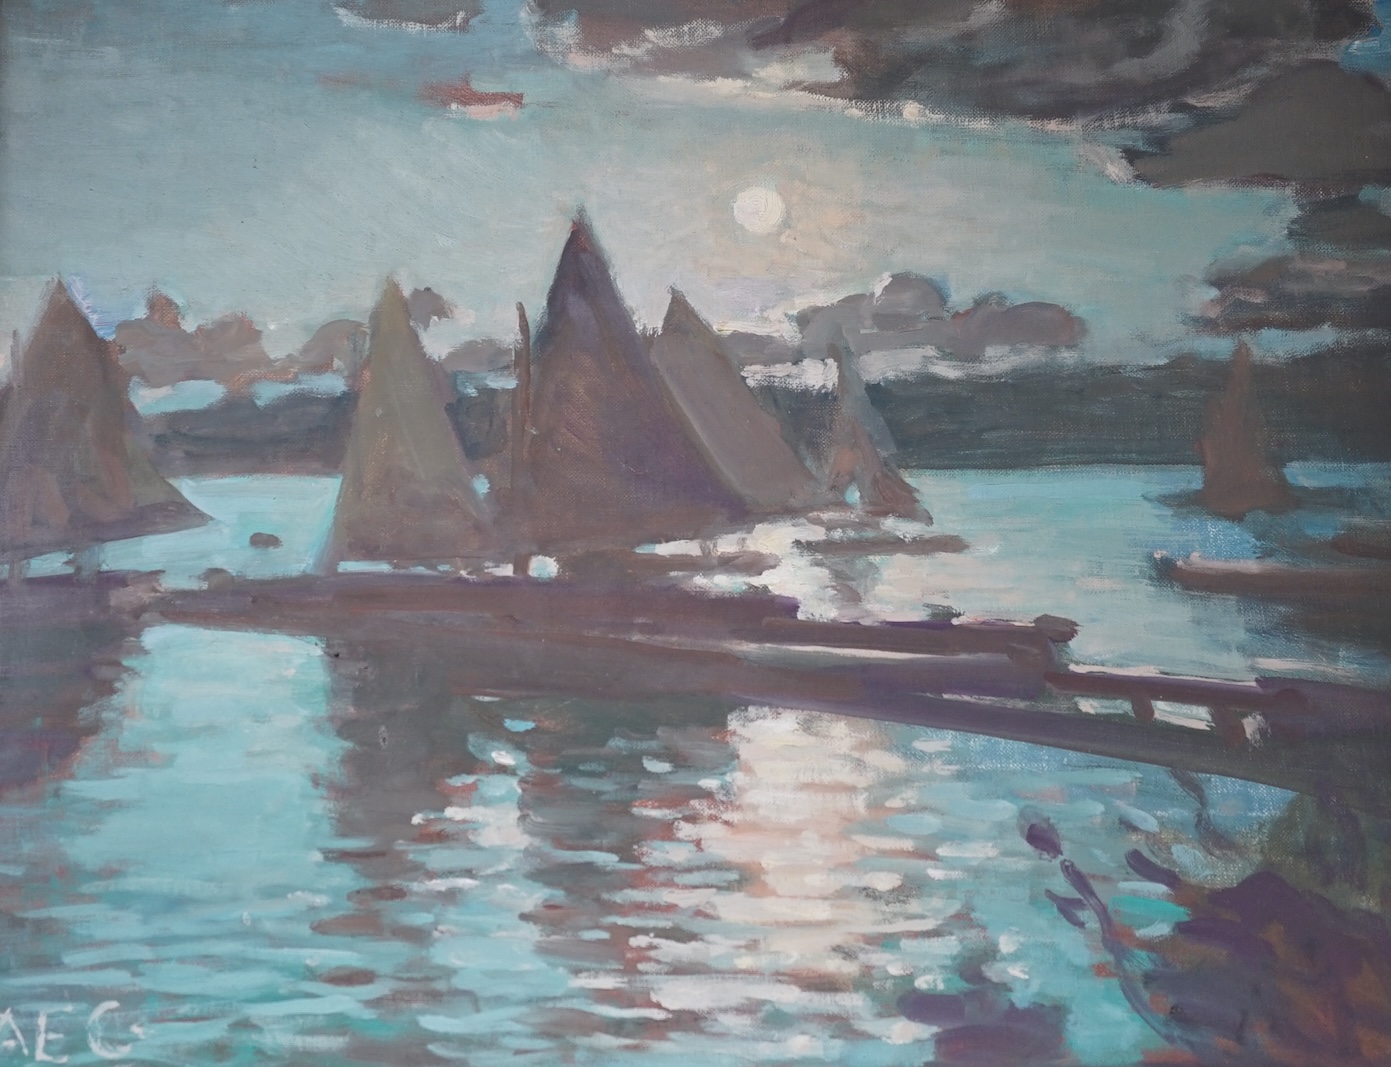 Alfred Egerton Cooper (1883-1974), oil on board, 'Yachts, Grandtully, Perthshire', monogrammed, Artists of Chelsea inscribed label verso, 40 x 50cm. Condition - fair, board warped and loose within frame